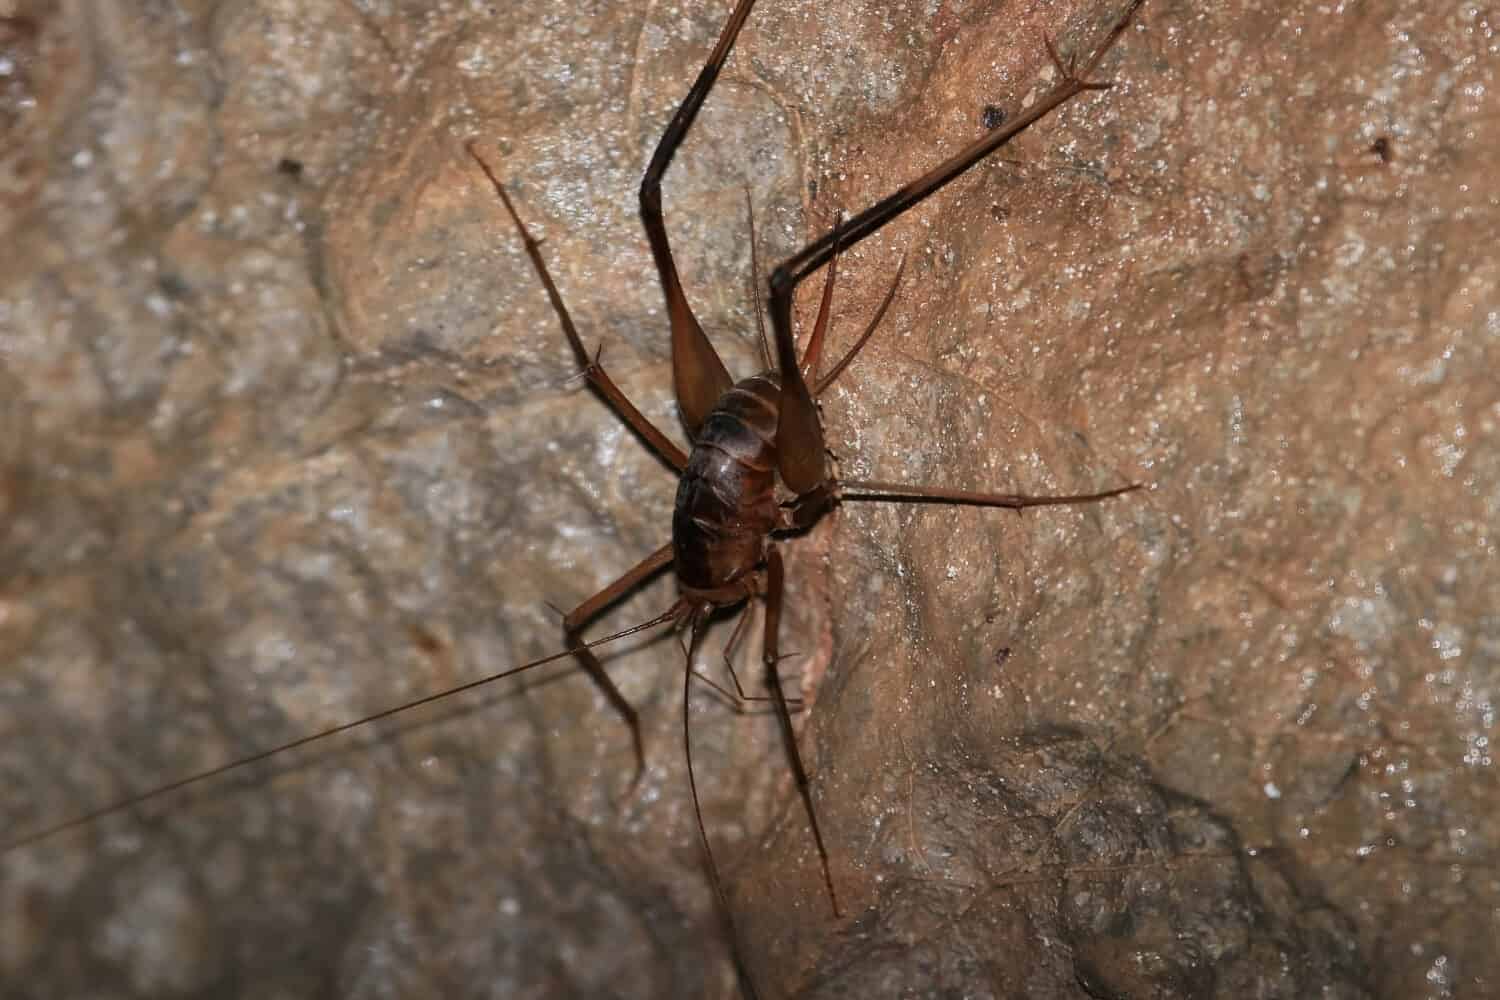 the cave cricket. live in darkness in warm caves